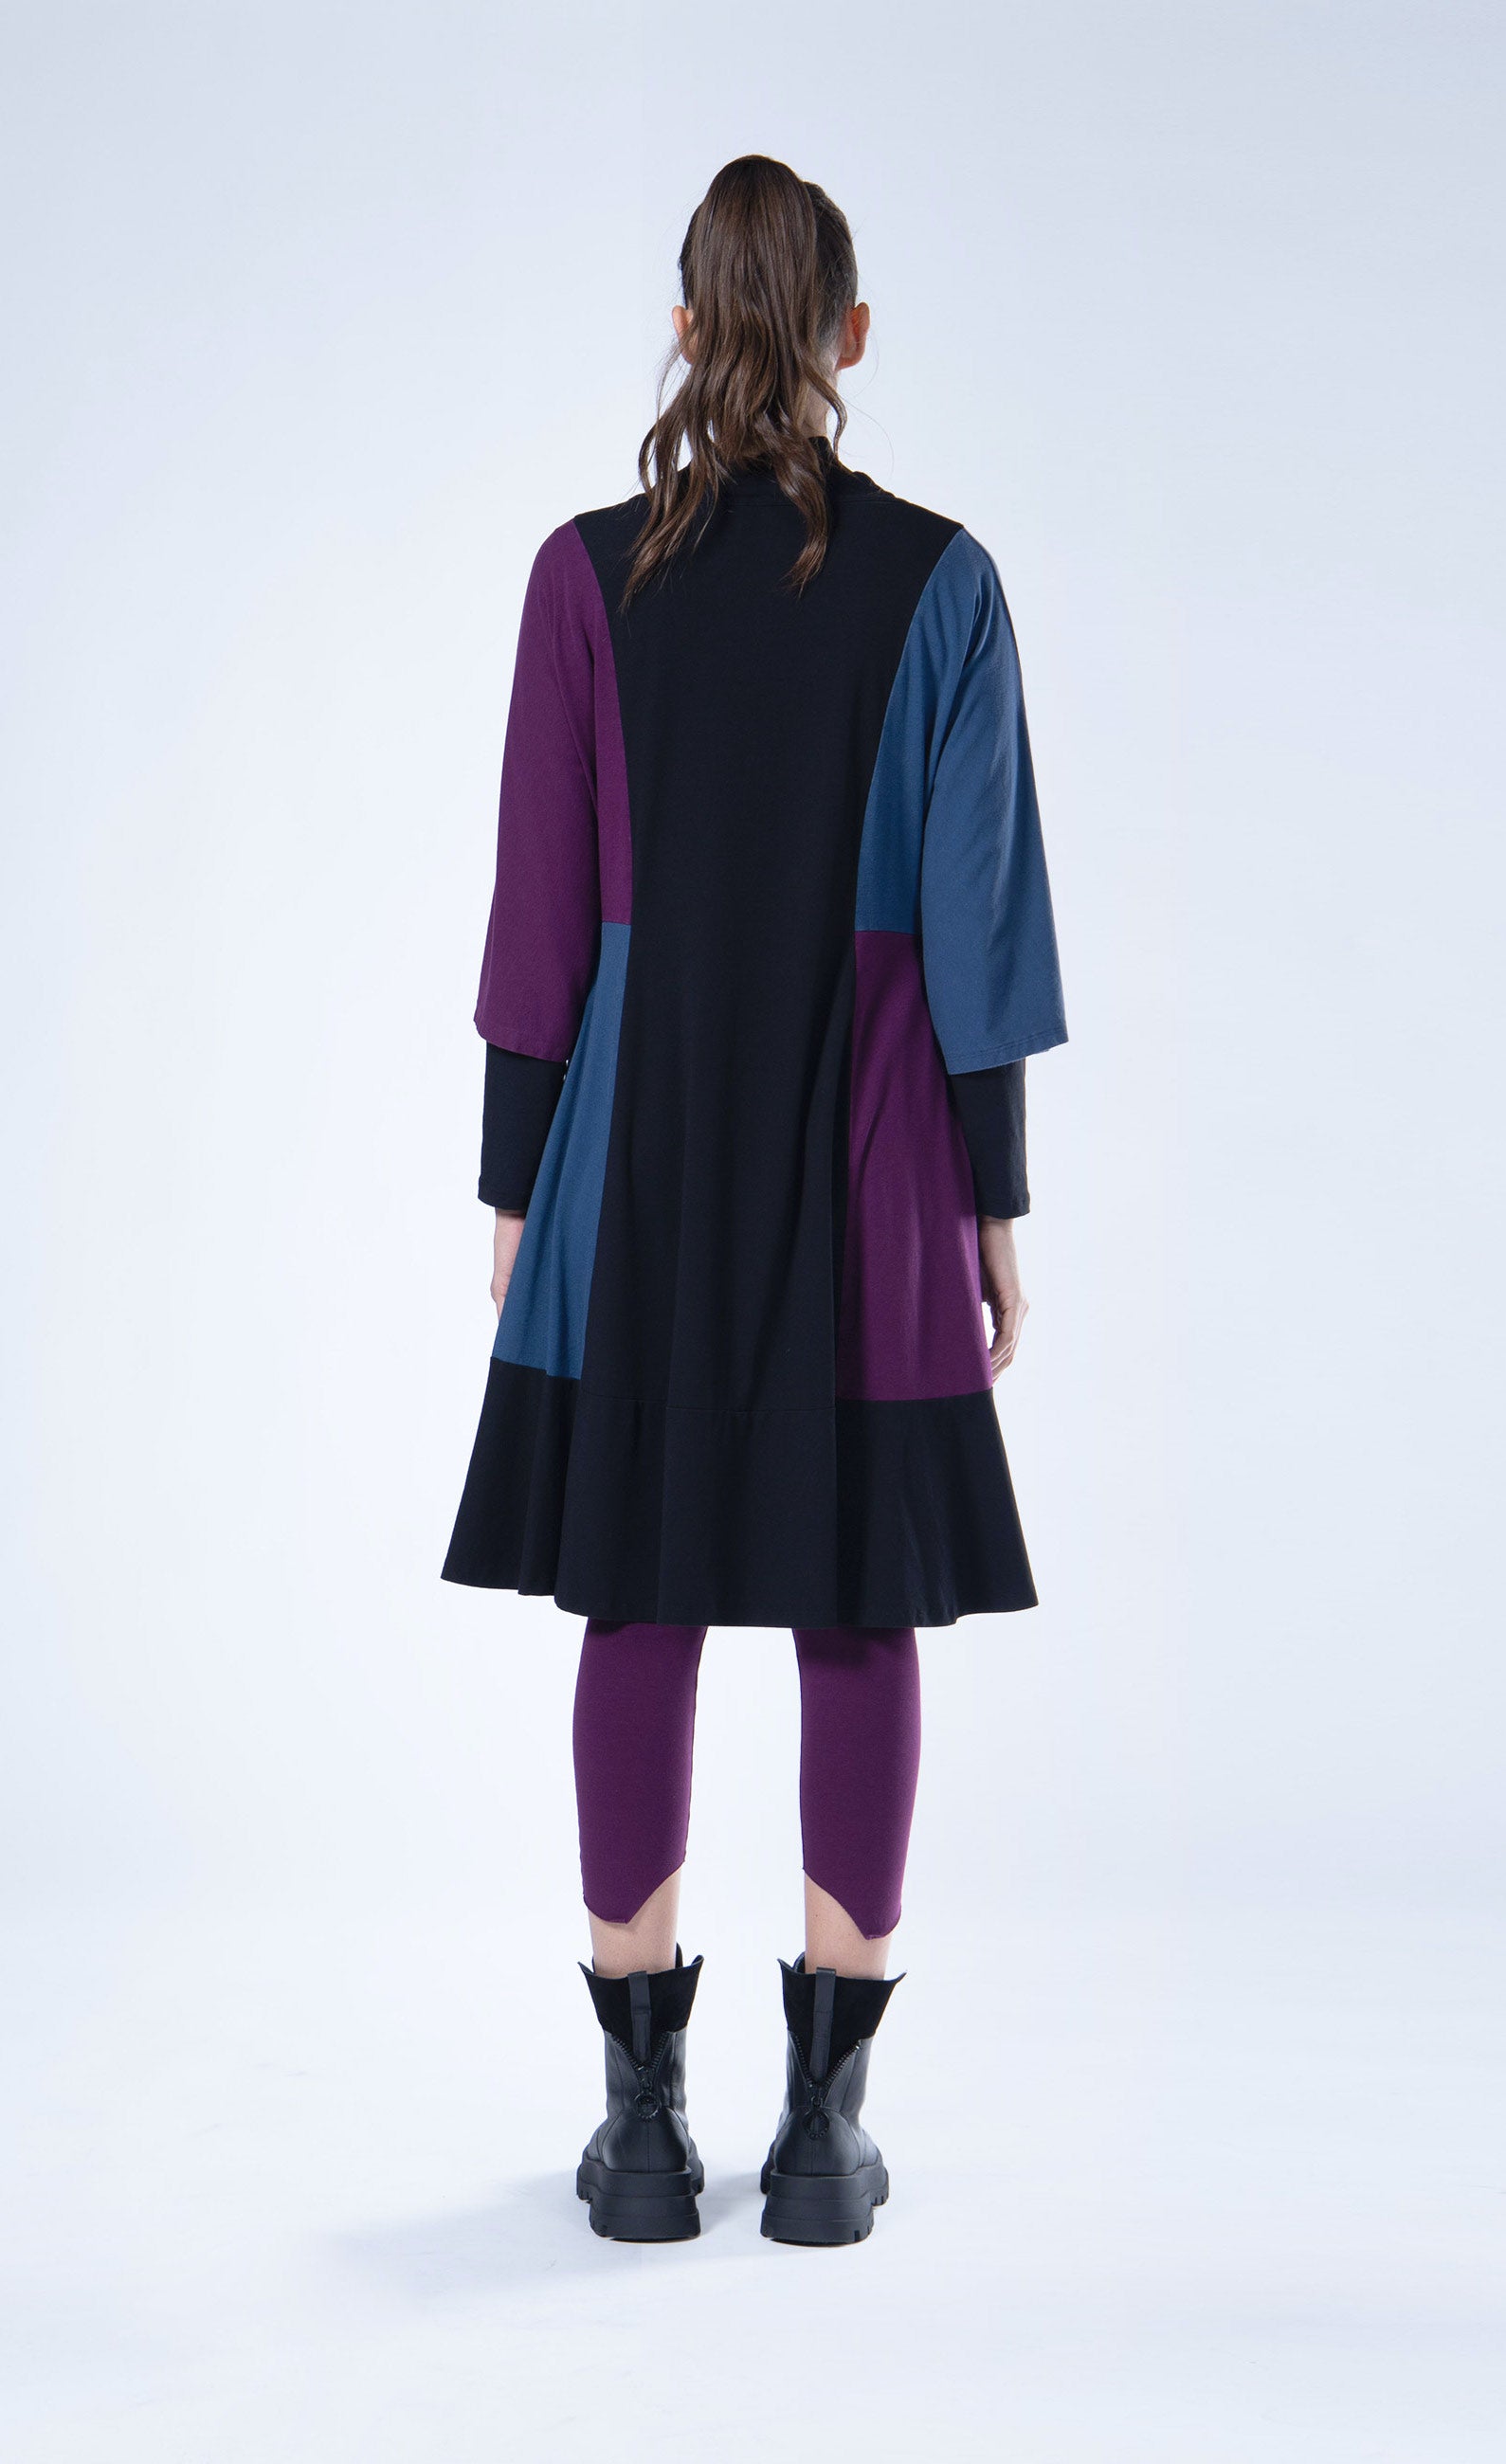 Back full body view of a woman wearing the luukaa color block tunic/dress. This knee-length dress is black with a blue and purple color blocking on the sides and sleeves. The dress also has elbow-length sleeves and a funnel neck.